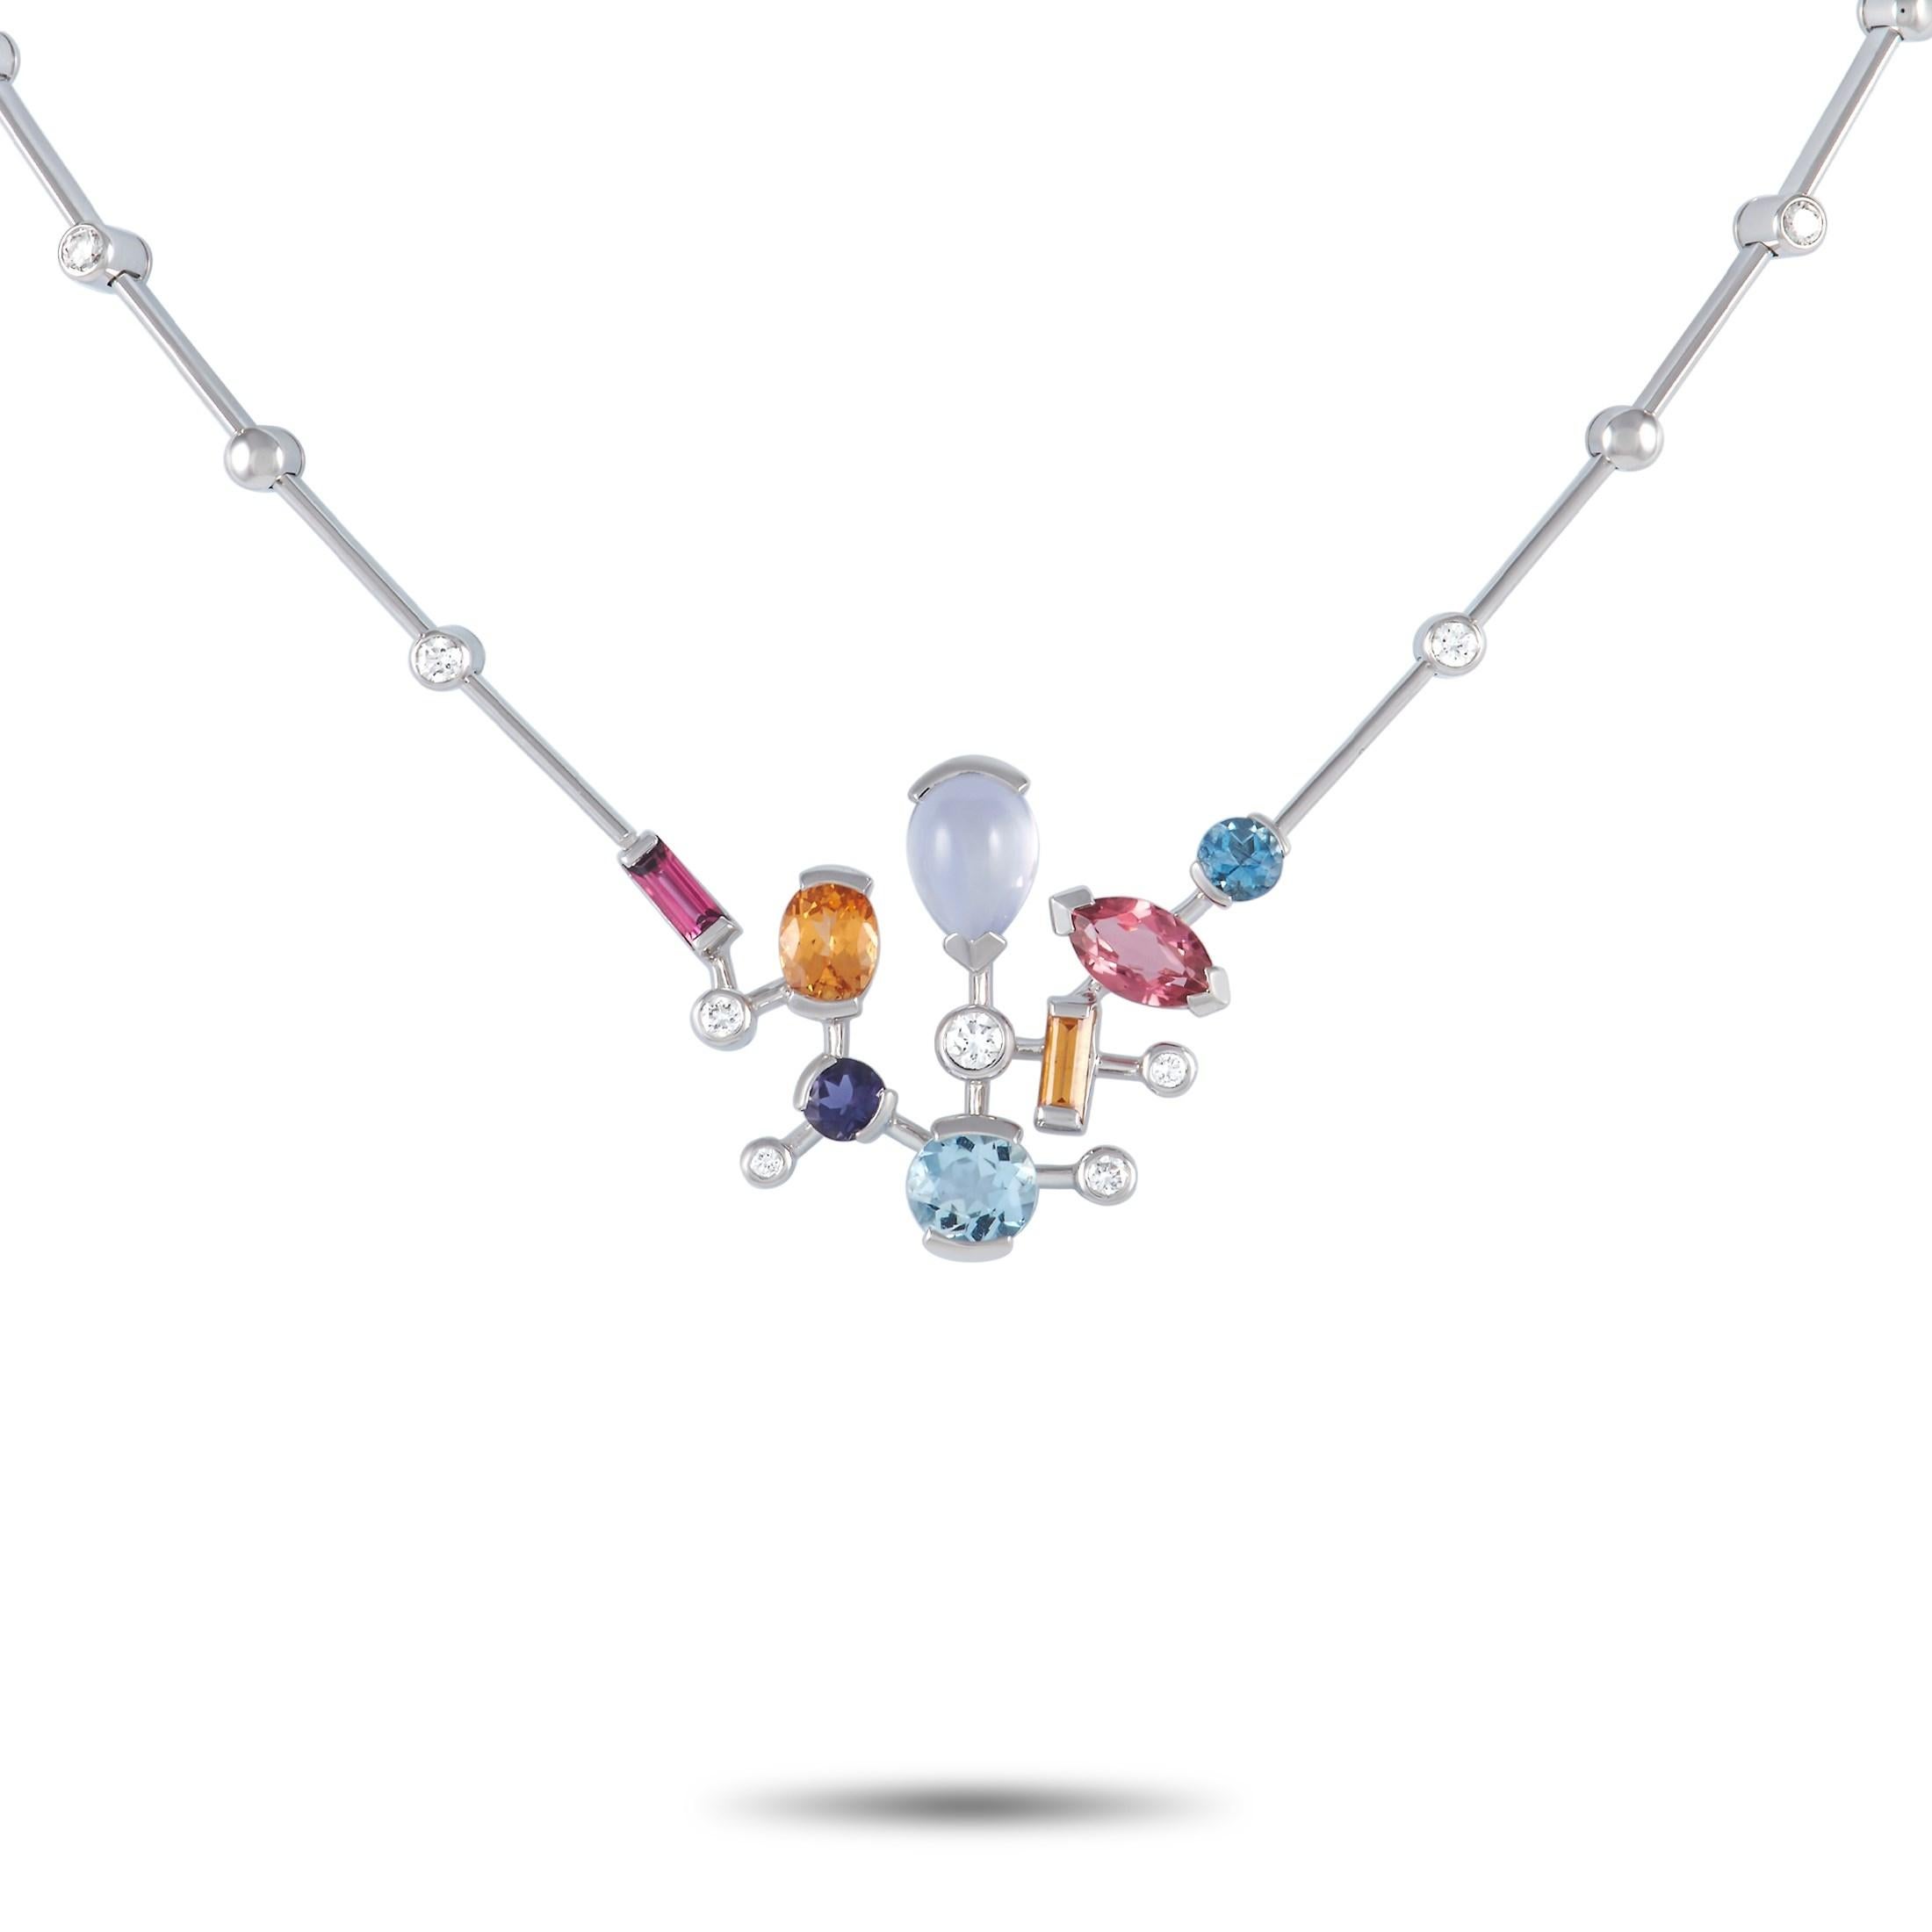 Delivering a playful fashion statement is this Cartier Meli Melo 18K White Gold Multi-Gem Necklace. Mounted on a geometric pendant in white gold are various-shaped gemstones including aquamarine, moonstone, iolite, pink tourmaline, and chalcedony.